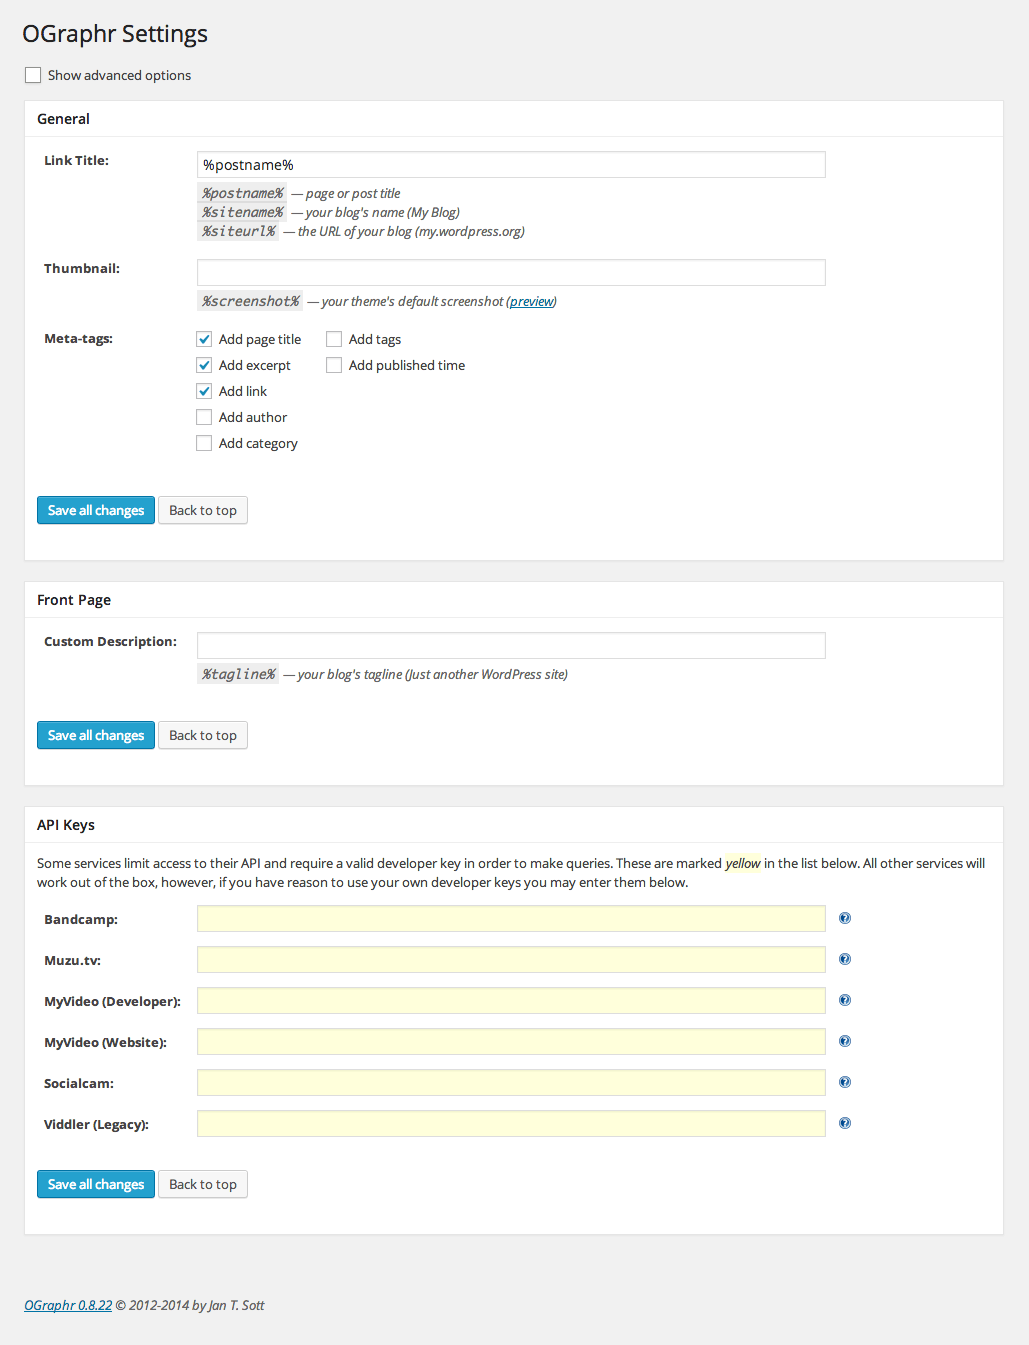 standard settings page for OGraphr 0.8